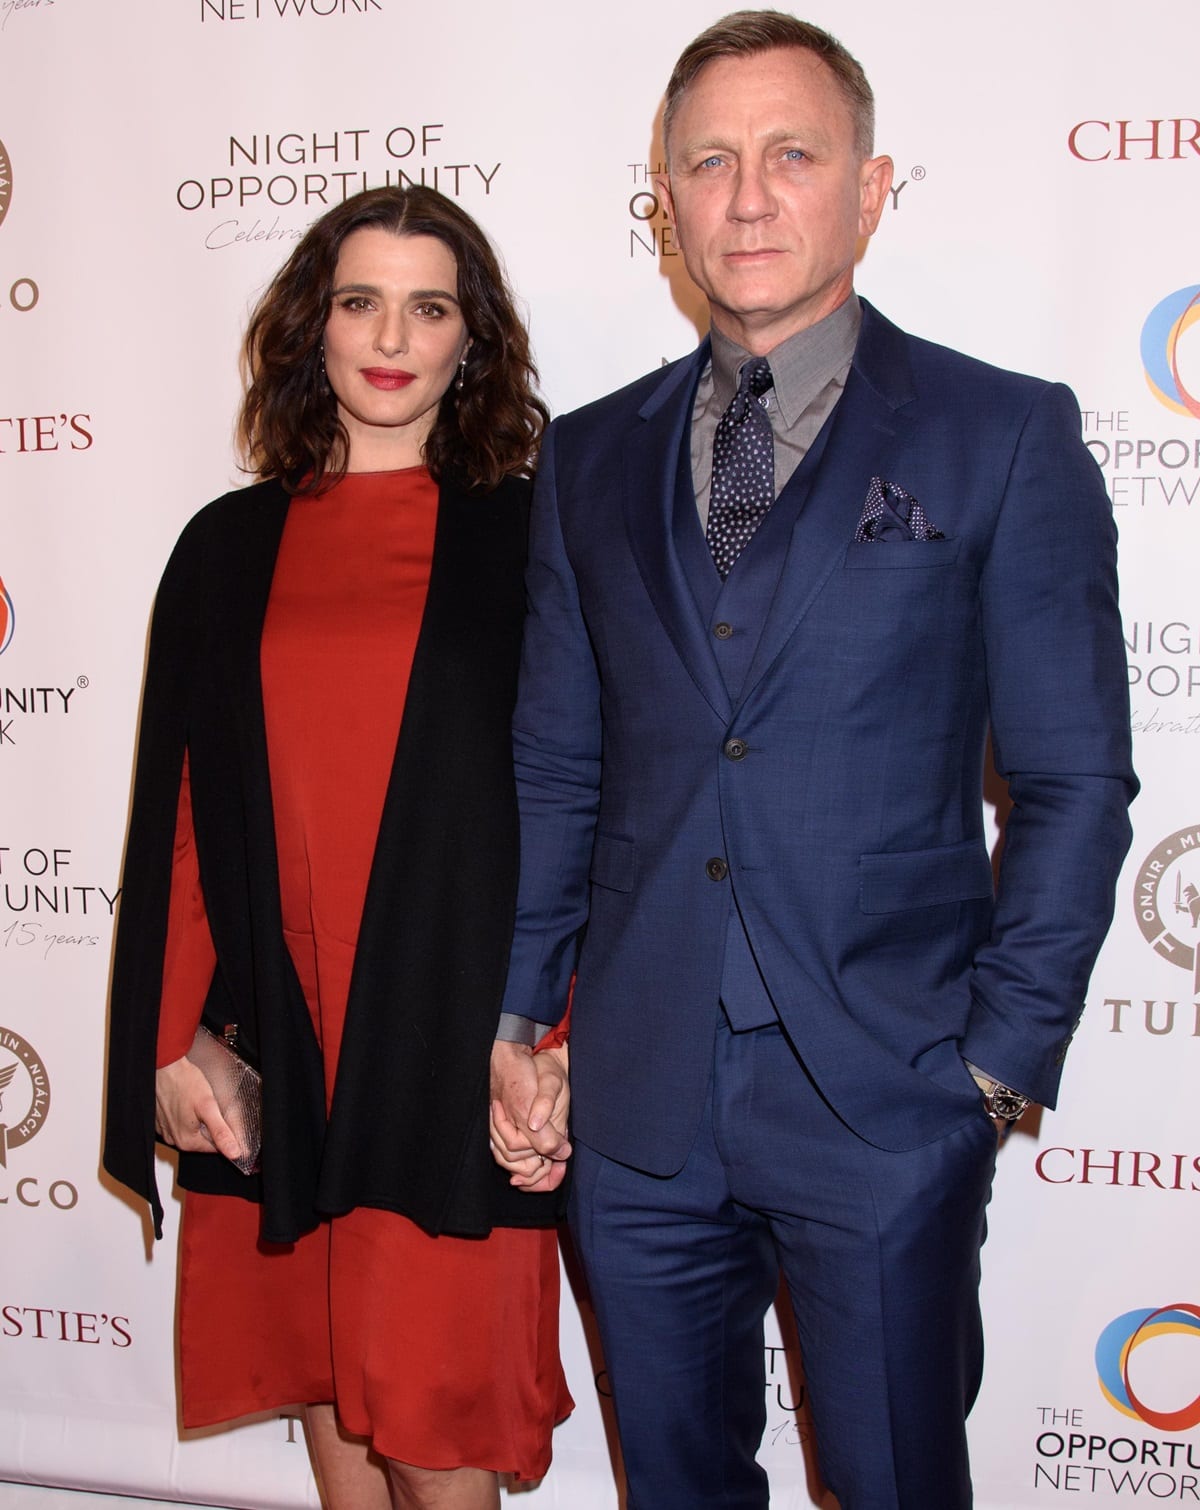 Rachel Weisz, born on March 7, 1970, and Daniel Craig, born on March 2, 1968, share a close bond with just a 2-year age difference between them